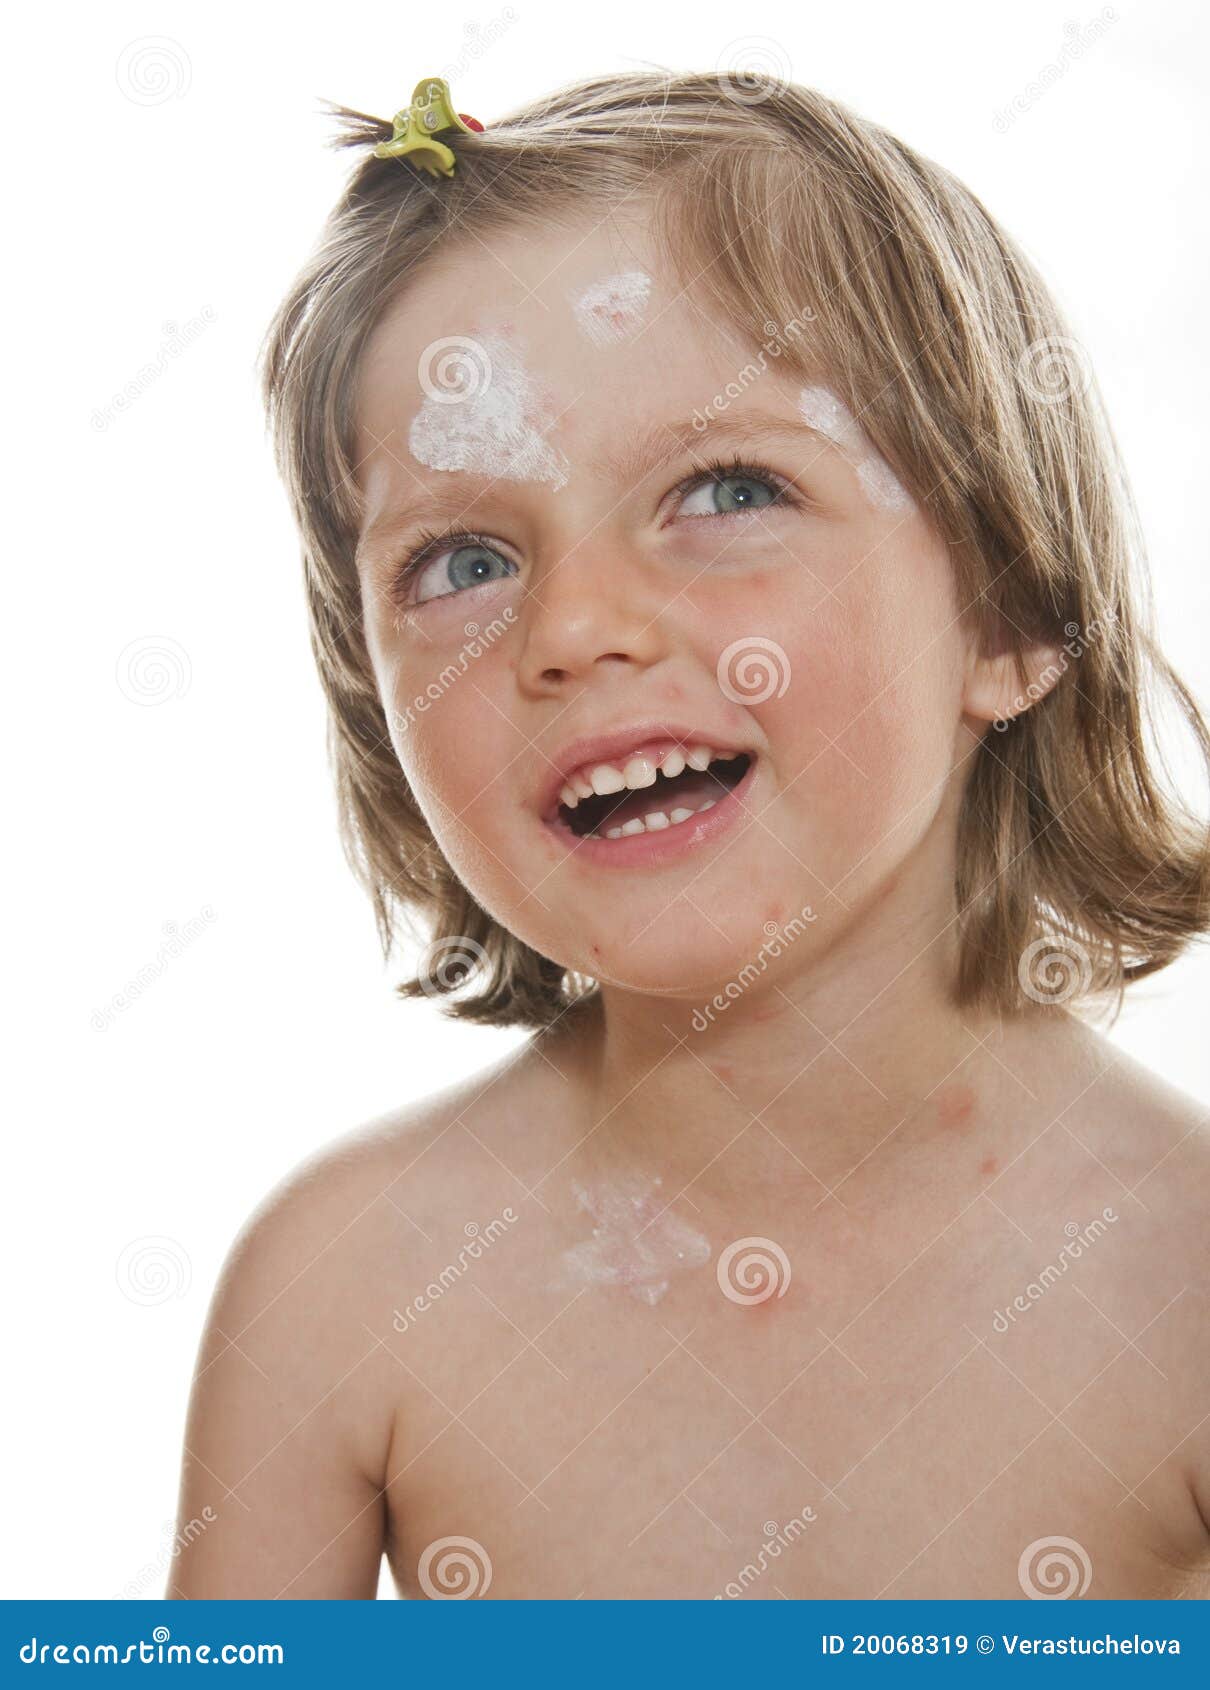 crying little girl with smallpox